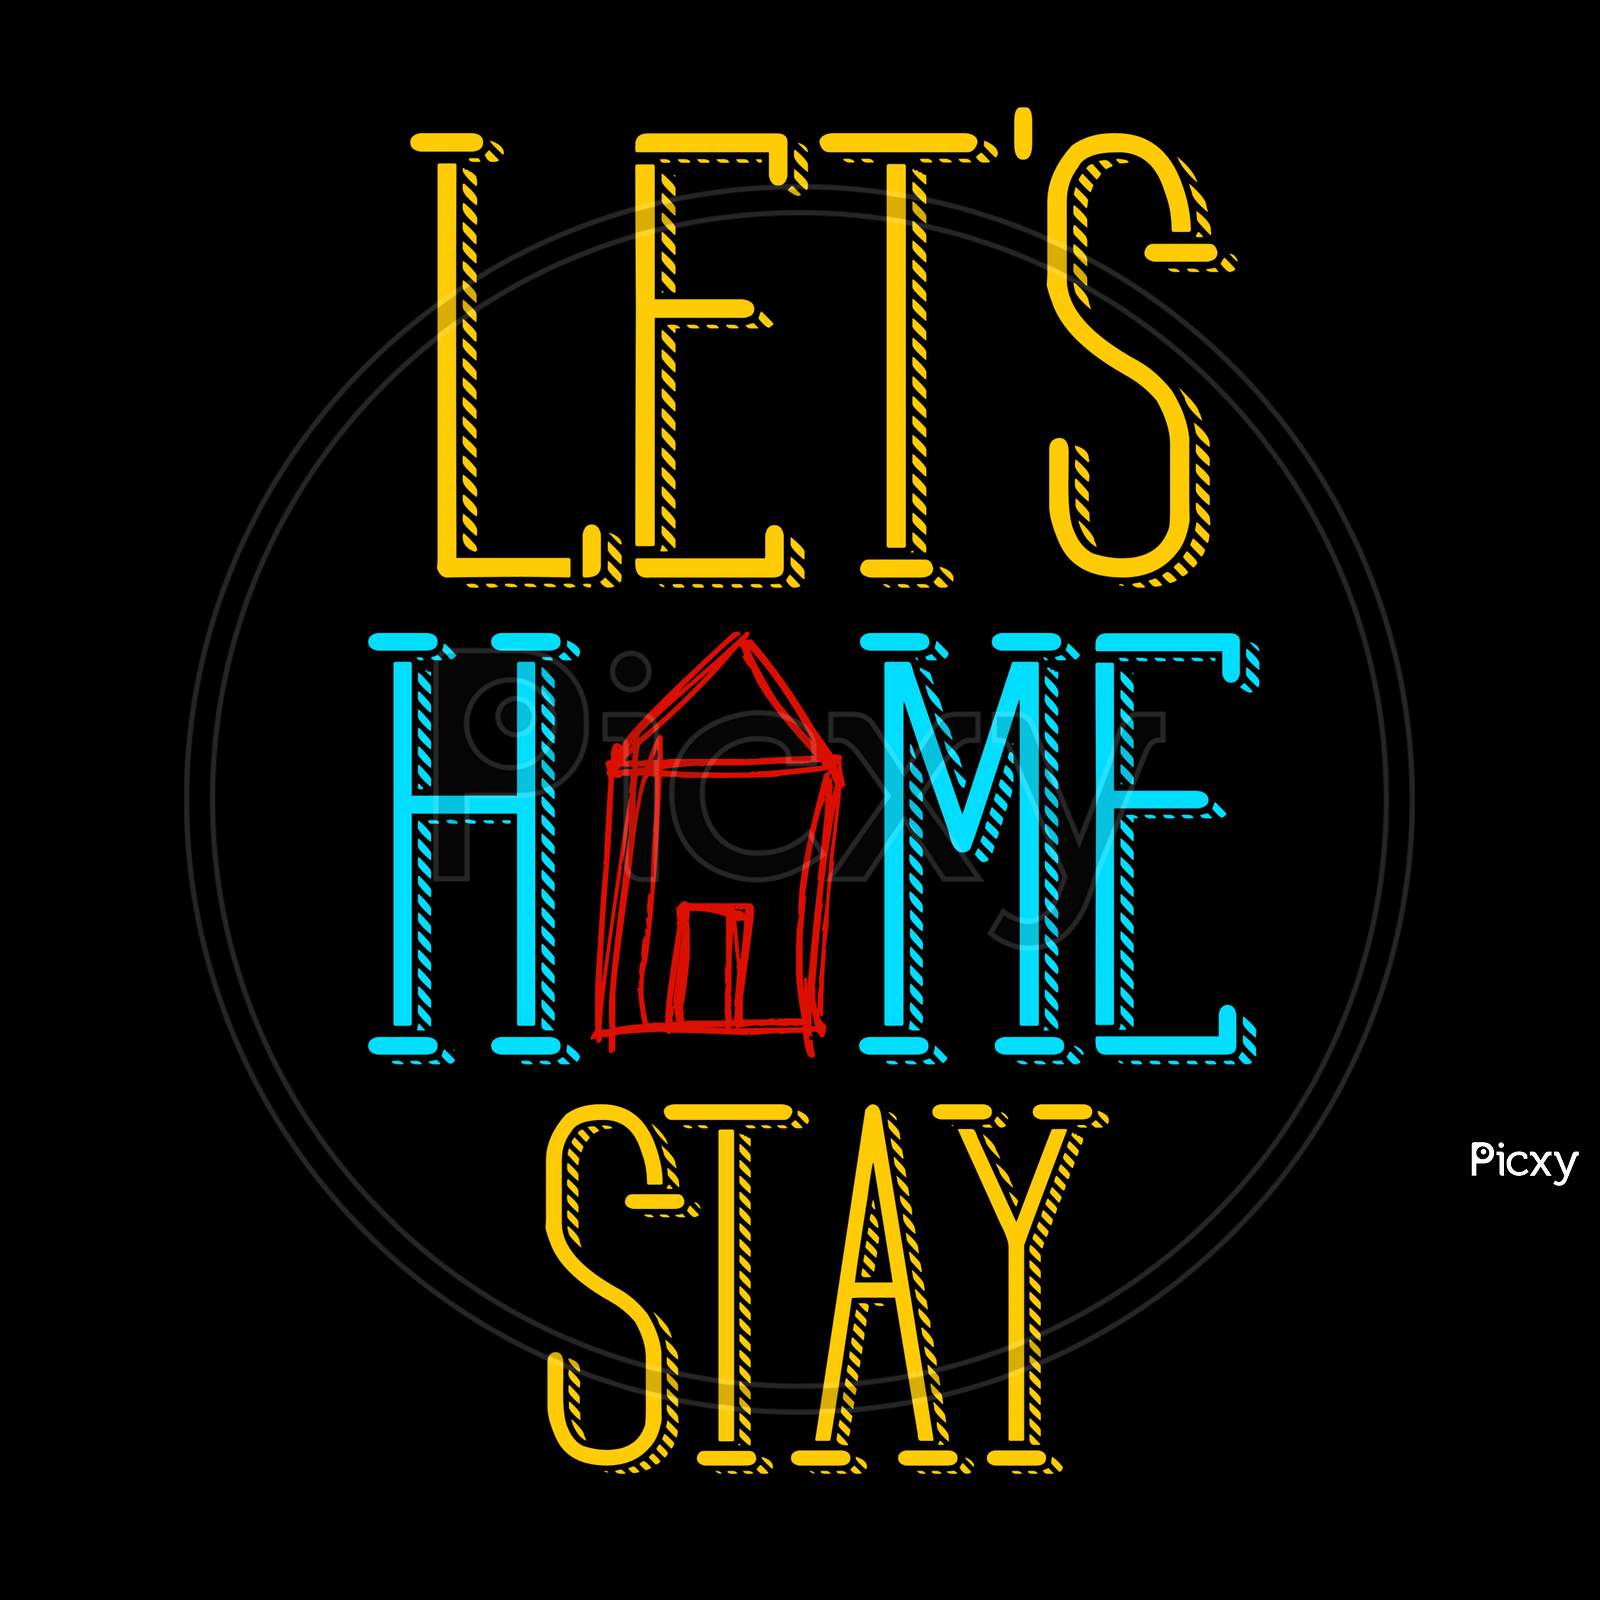 Let's Stay Home (black background with colorful fonts)